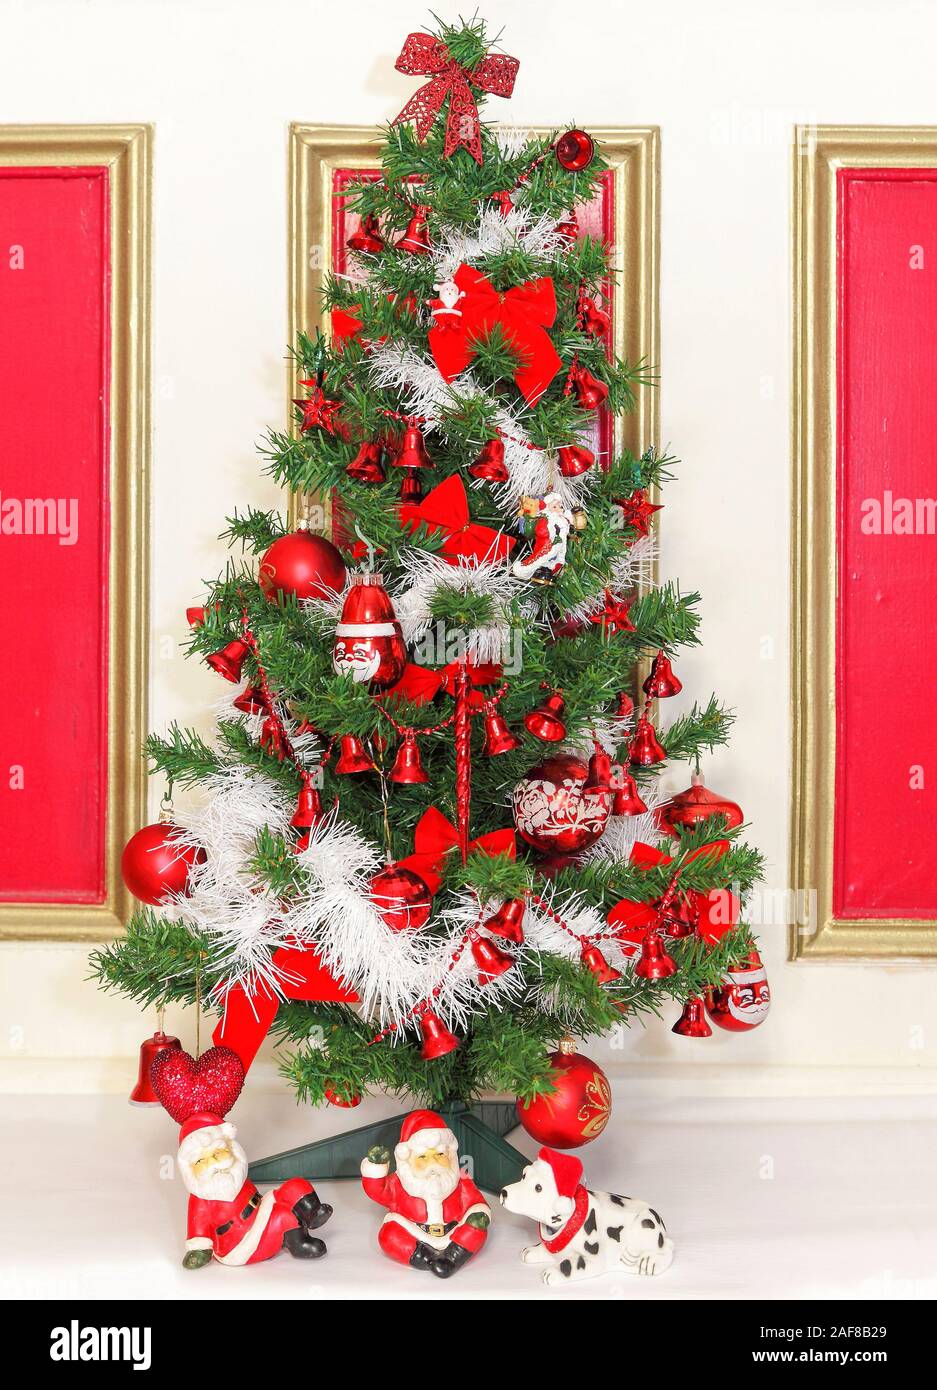 Red and white themed decorated Christmas tree to celebrate the holiday season , Xmas, Noel, Yuletide, Stock Photo